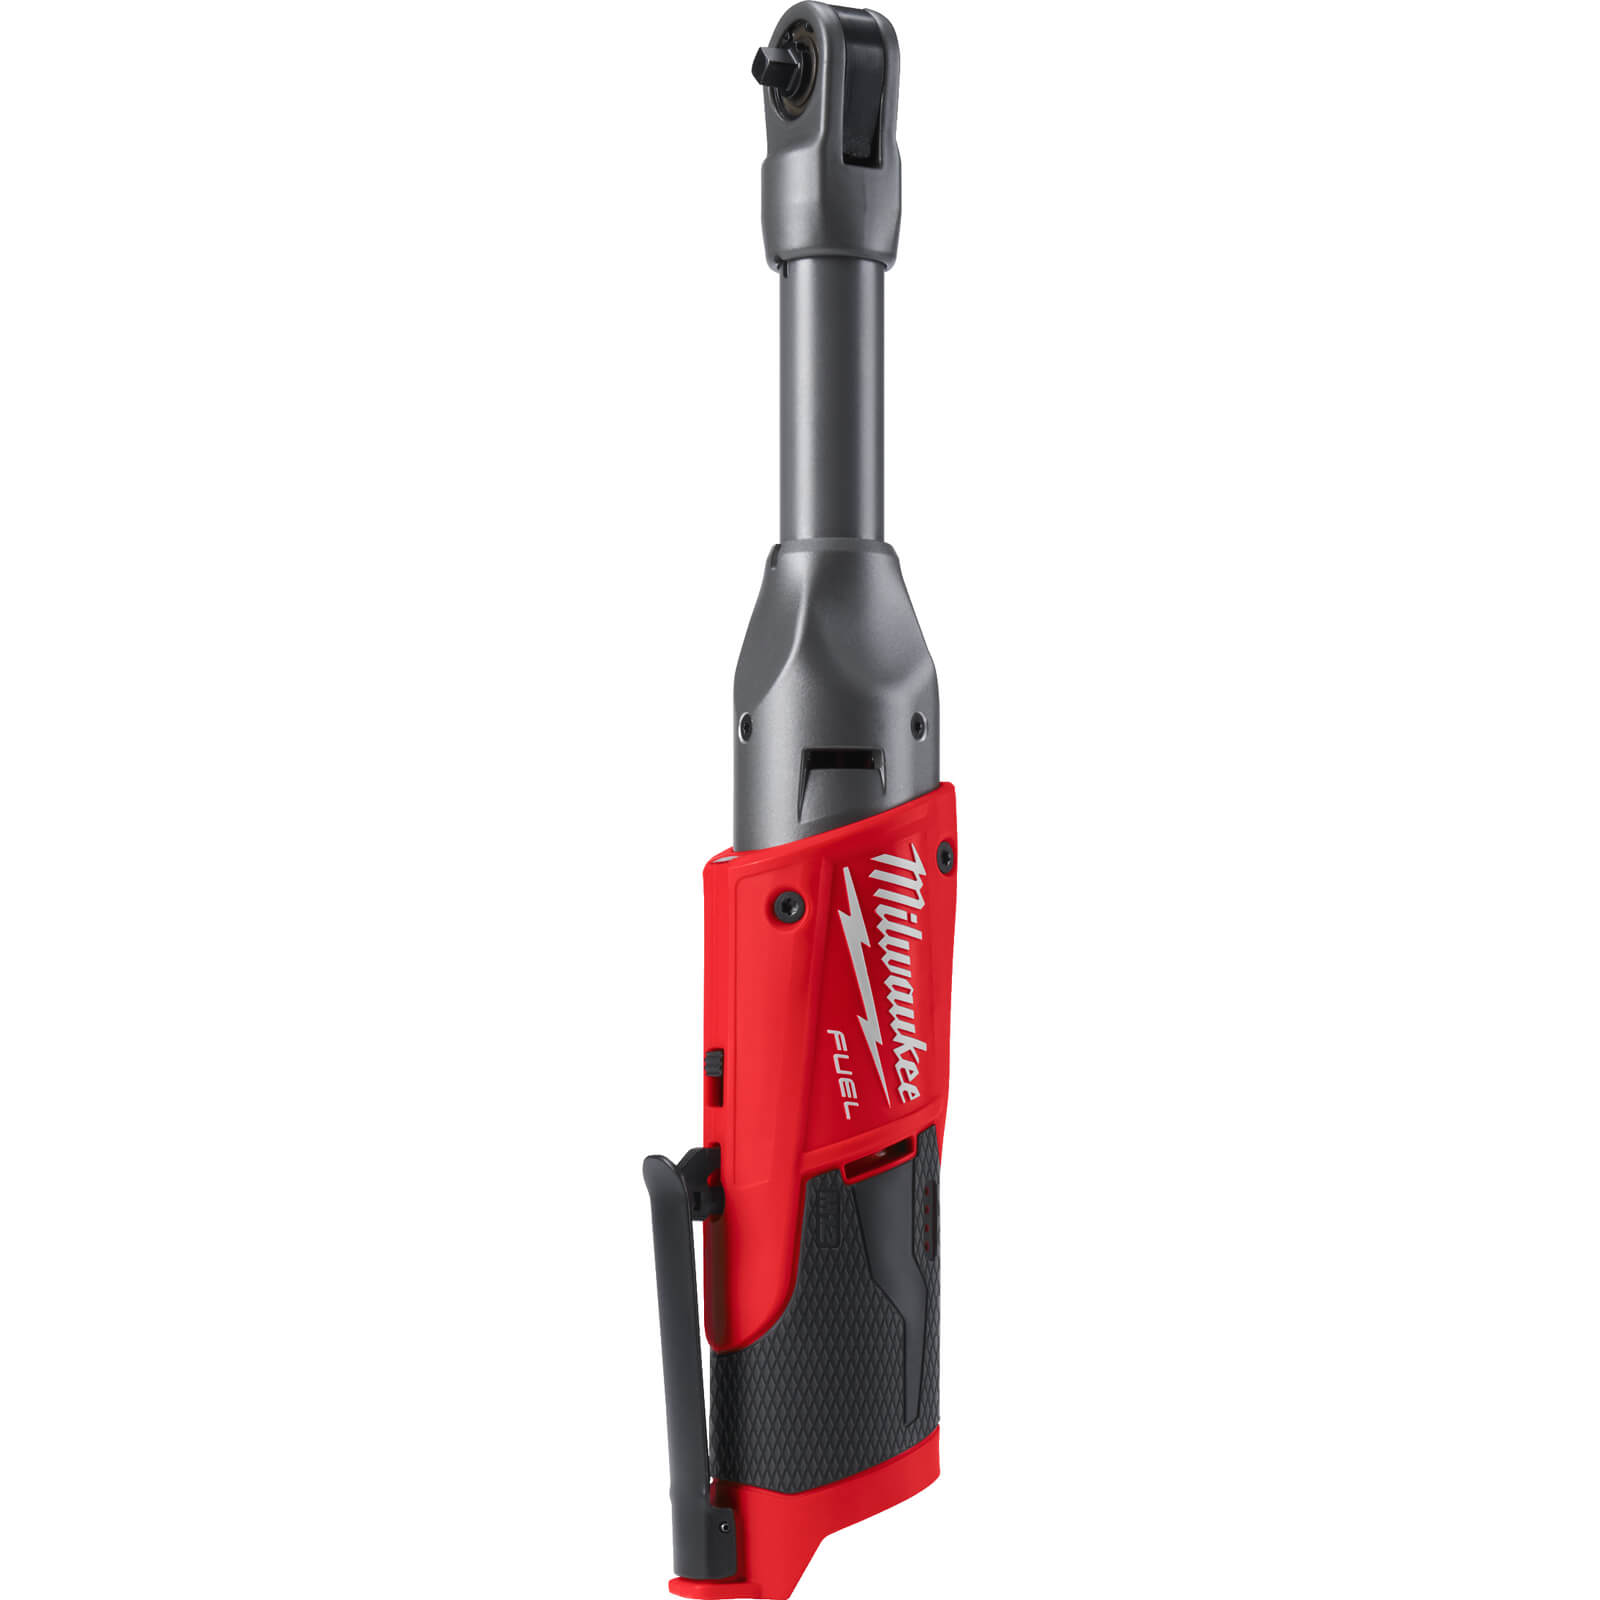 Image of Milwaukee M12 FIR14LR Fuel 12v Cordless Brushless 1/4" Drive Long Ratchet Wrench No Batteries No Charger No Case